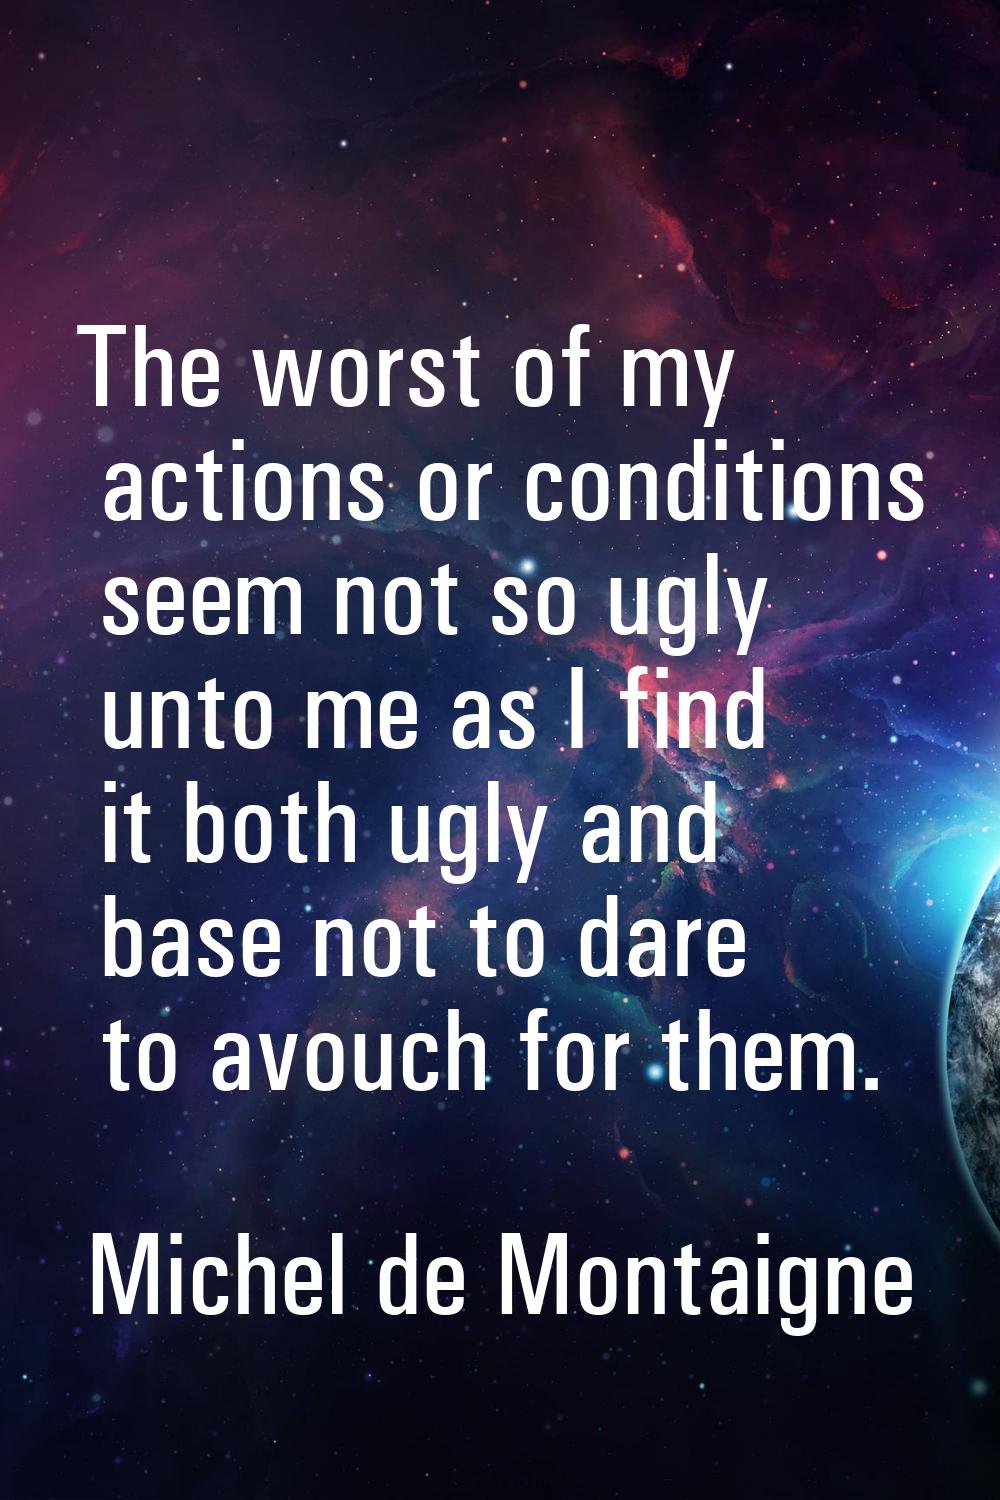 The worst of my actions or conditions seem not so ugly unto me as I find it both ugly and base not 